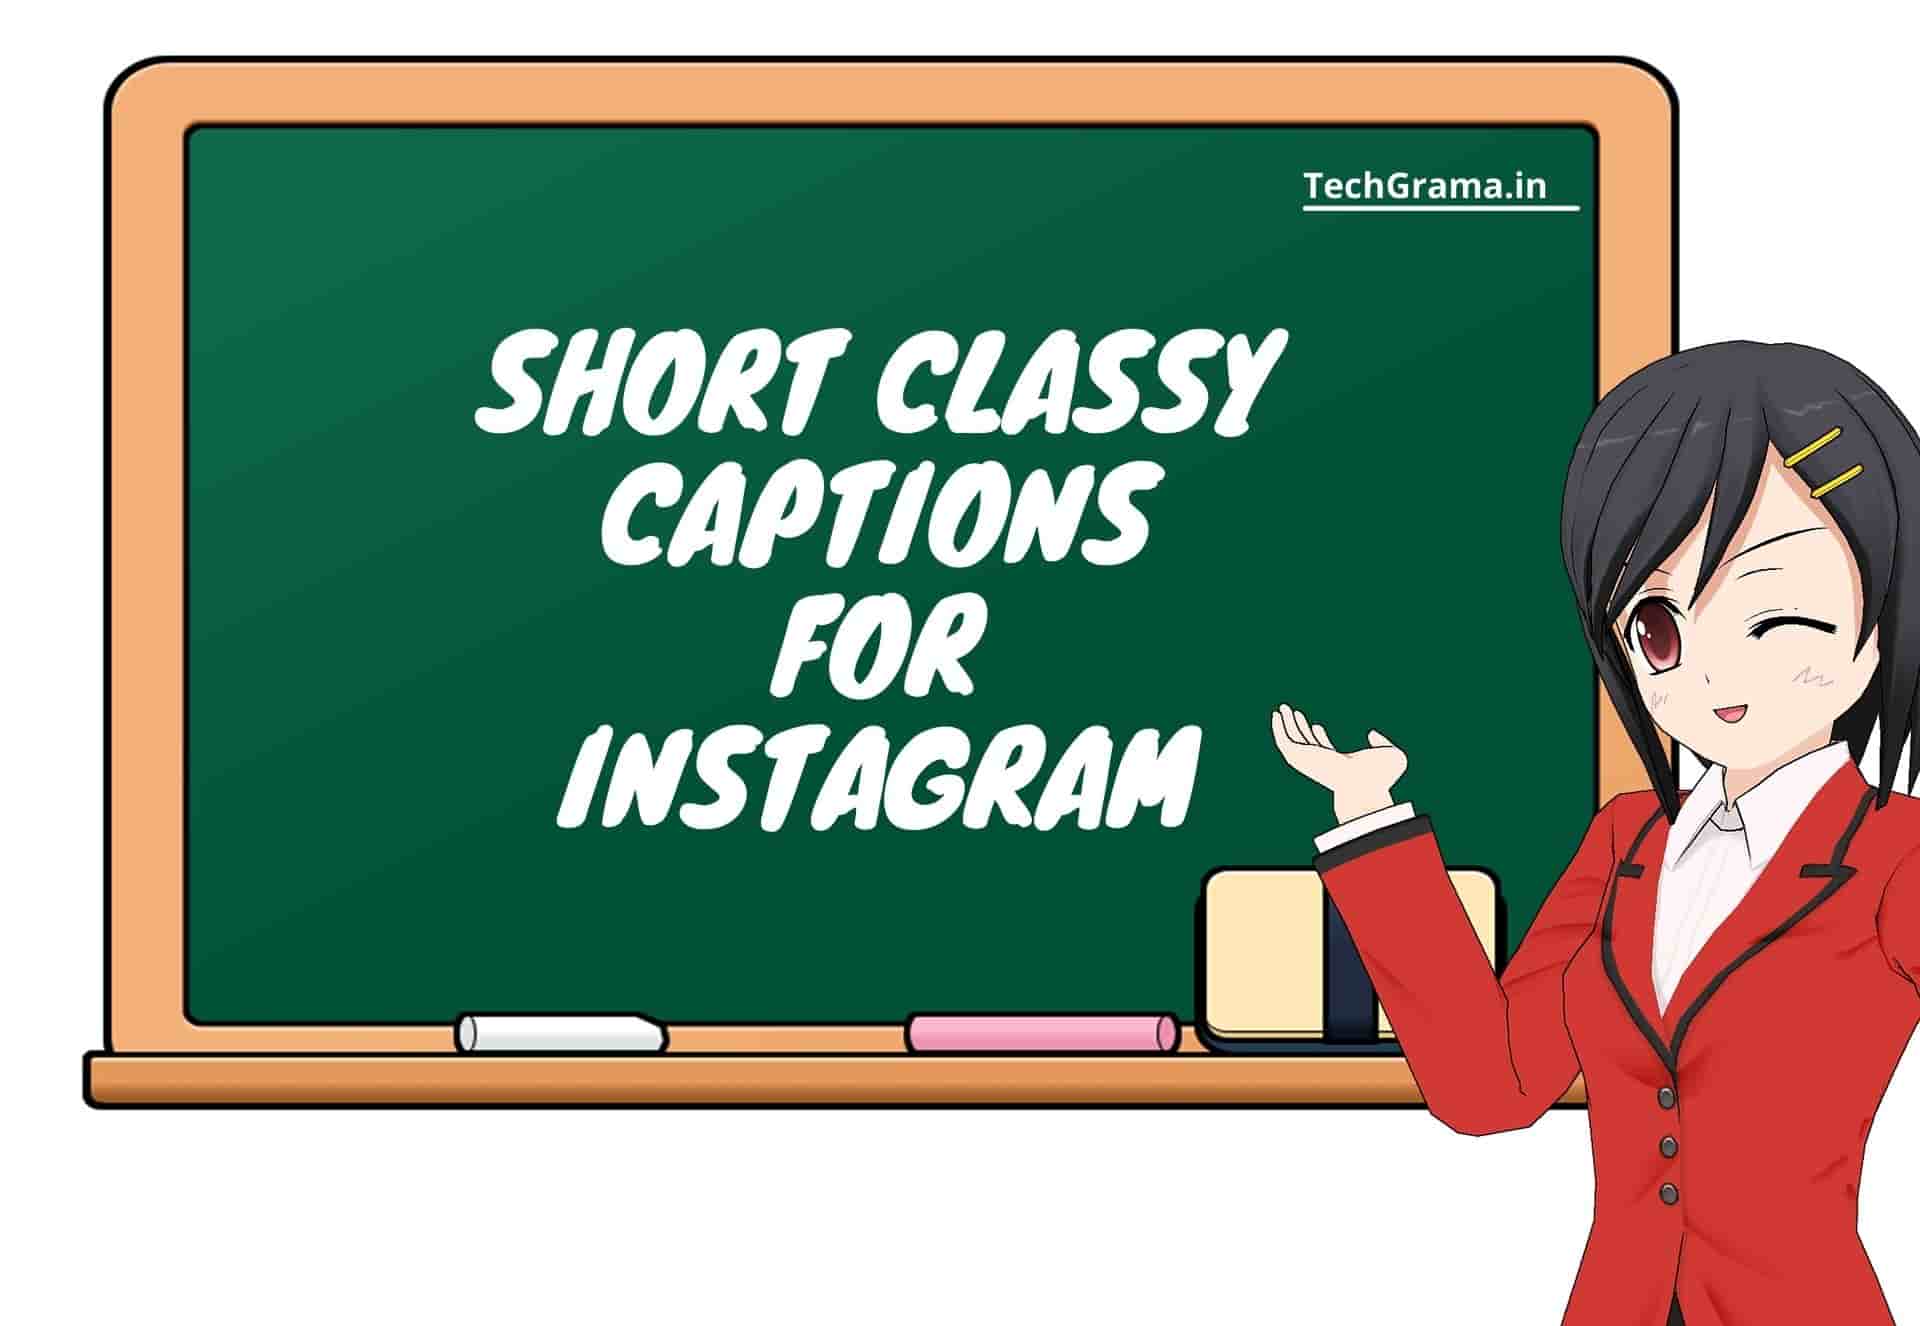 Best Classy Captions For Instagram Photos and Selfies, classy captions for instagram, classy captions for instagram for boy, classy captions for instagram for girl, classy captions for instagram post, short classy captions for instagram, classy captions for instagram pictures, classy captions for instagram in hindi, classy captions for instagram selfies, cute classy captions for instagram, sassy and classy captions for instagram, savage classy captions for instagram, one line classy captions for instagram, simple and classy captions for instagram, one word classy captions for instagram, attitude and classy captions for instagram, classy instagram captions for guys, classy quotes for instagram post.